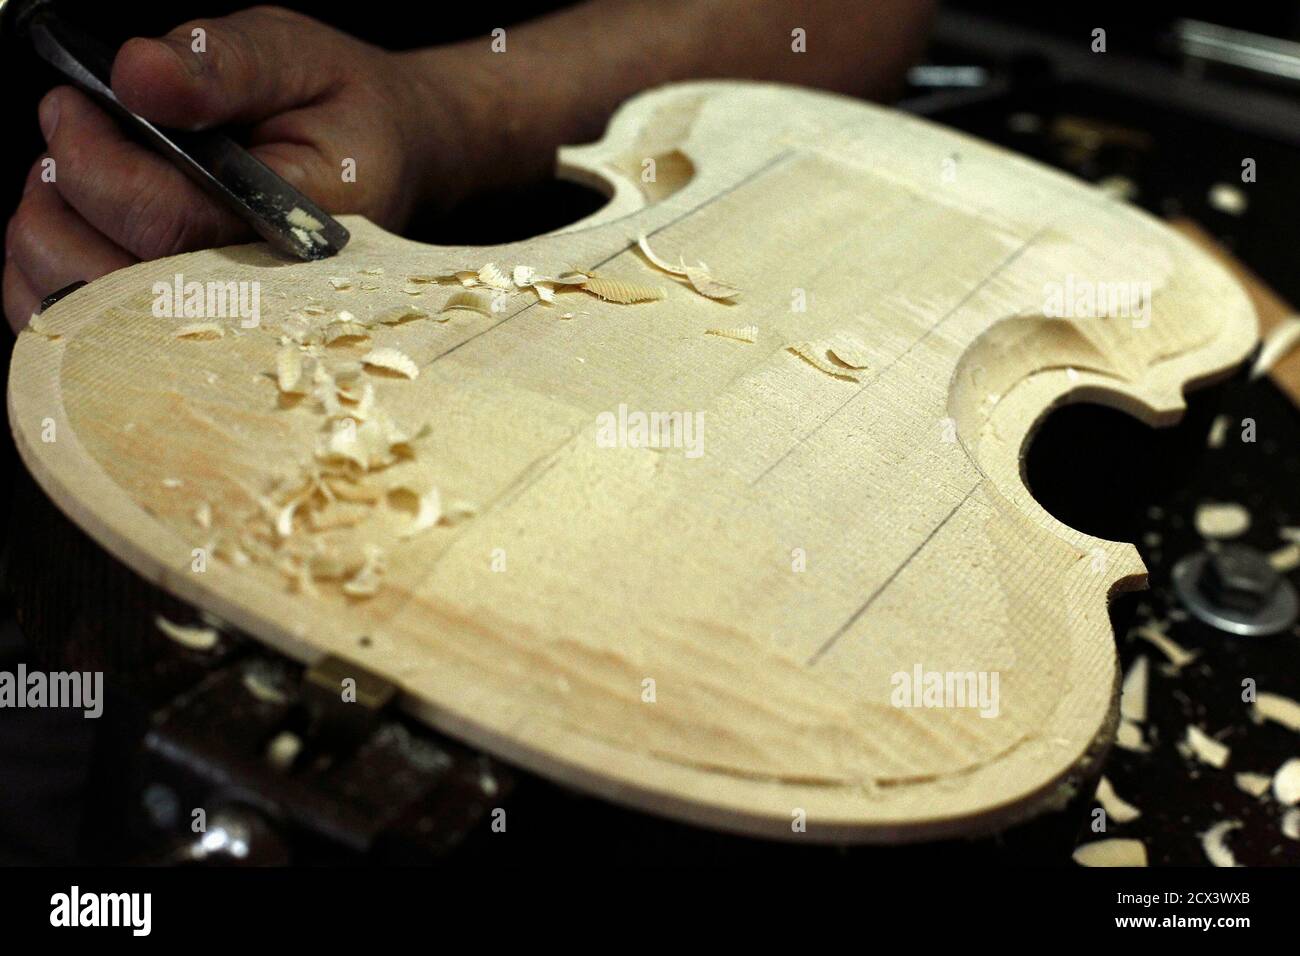 Jose Prada constructs a violin at his father's workshop in San Jose, August  10, 2012. Four generations of the Prada family have been involved in the  crafting and restoration of violins and